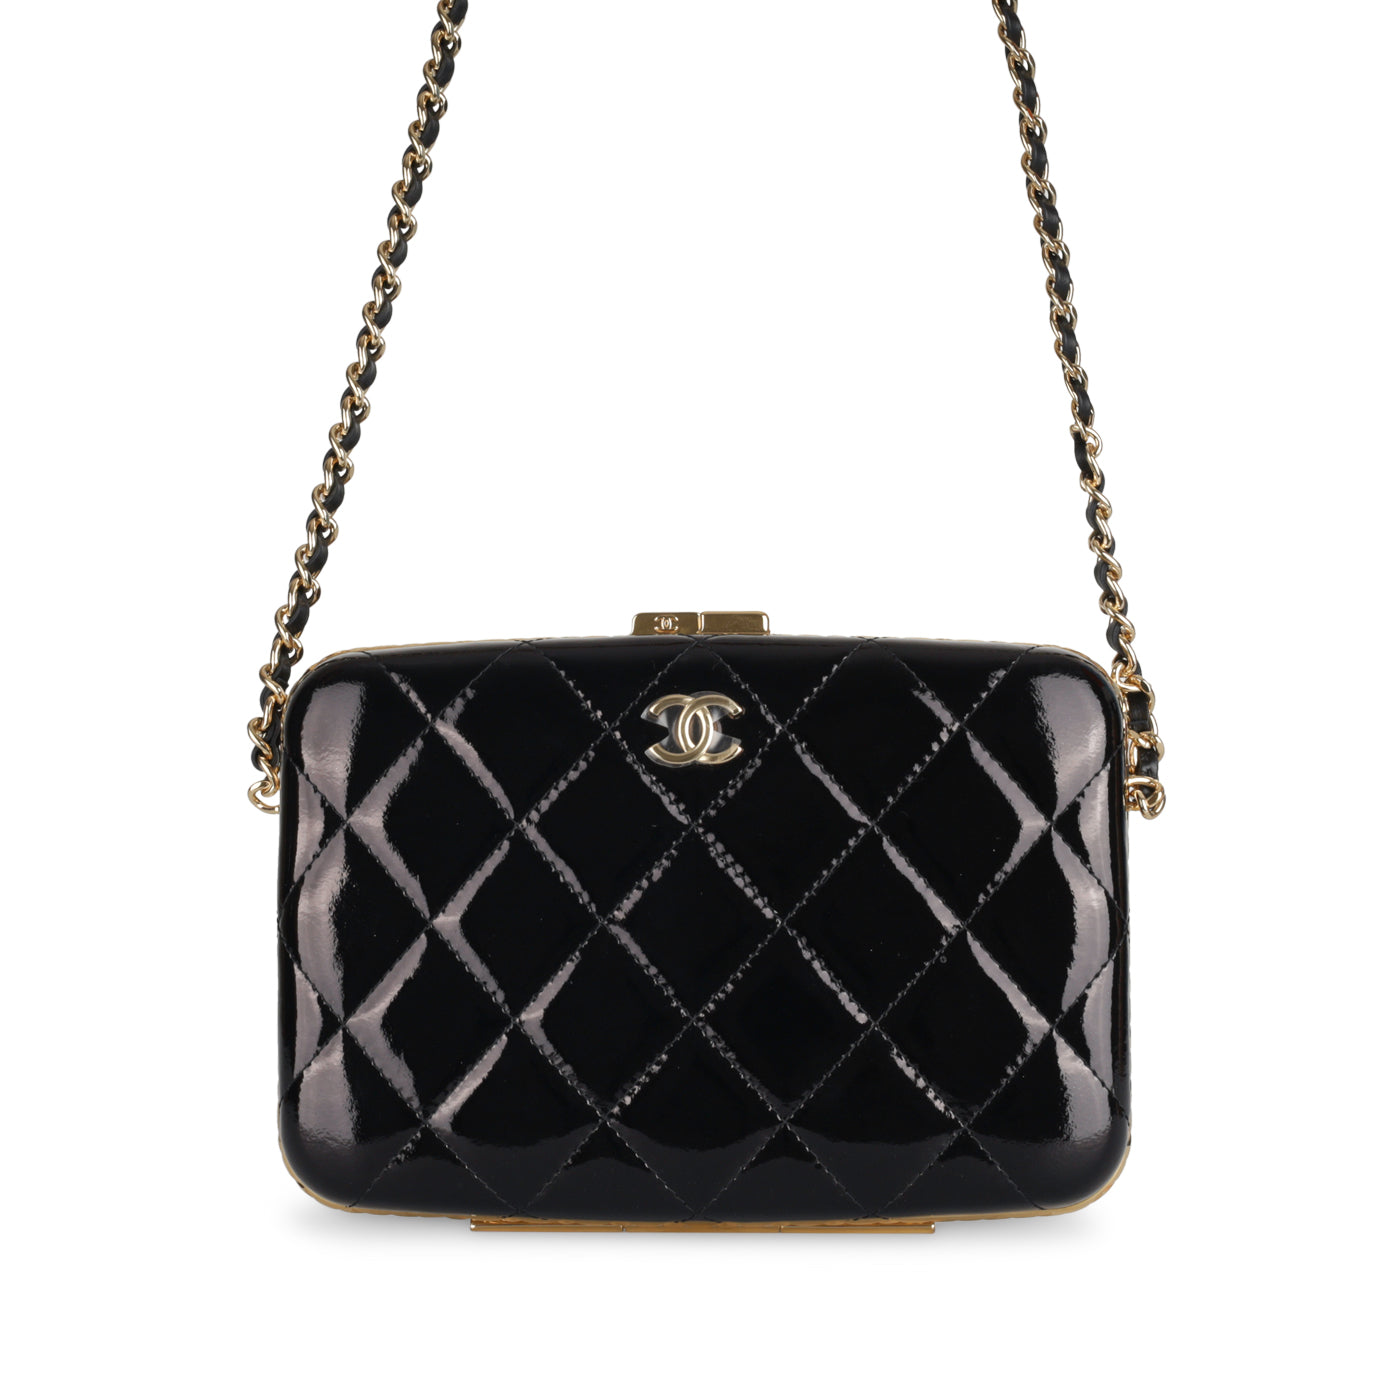 Chanel - Box Clutch on Chain - Black Patent - CGHW - Mint